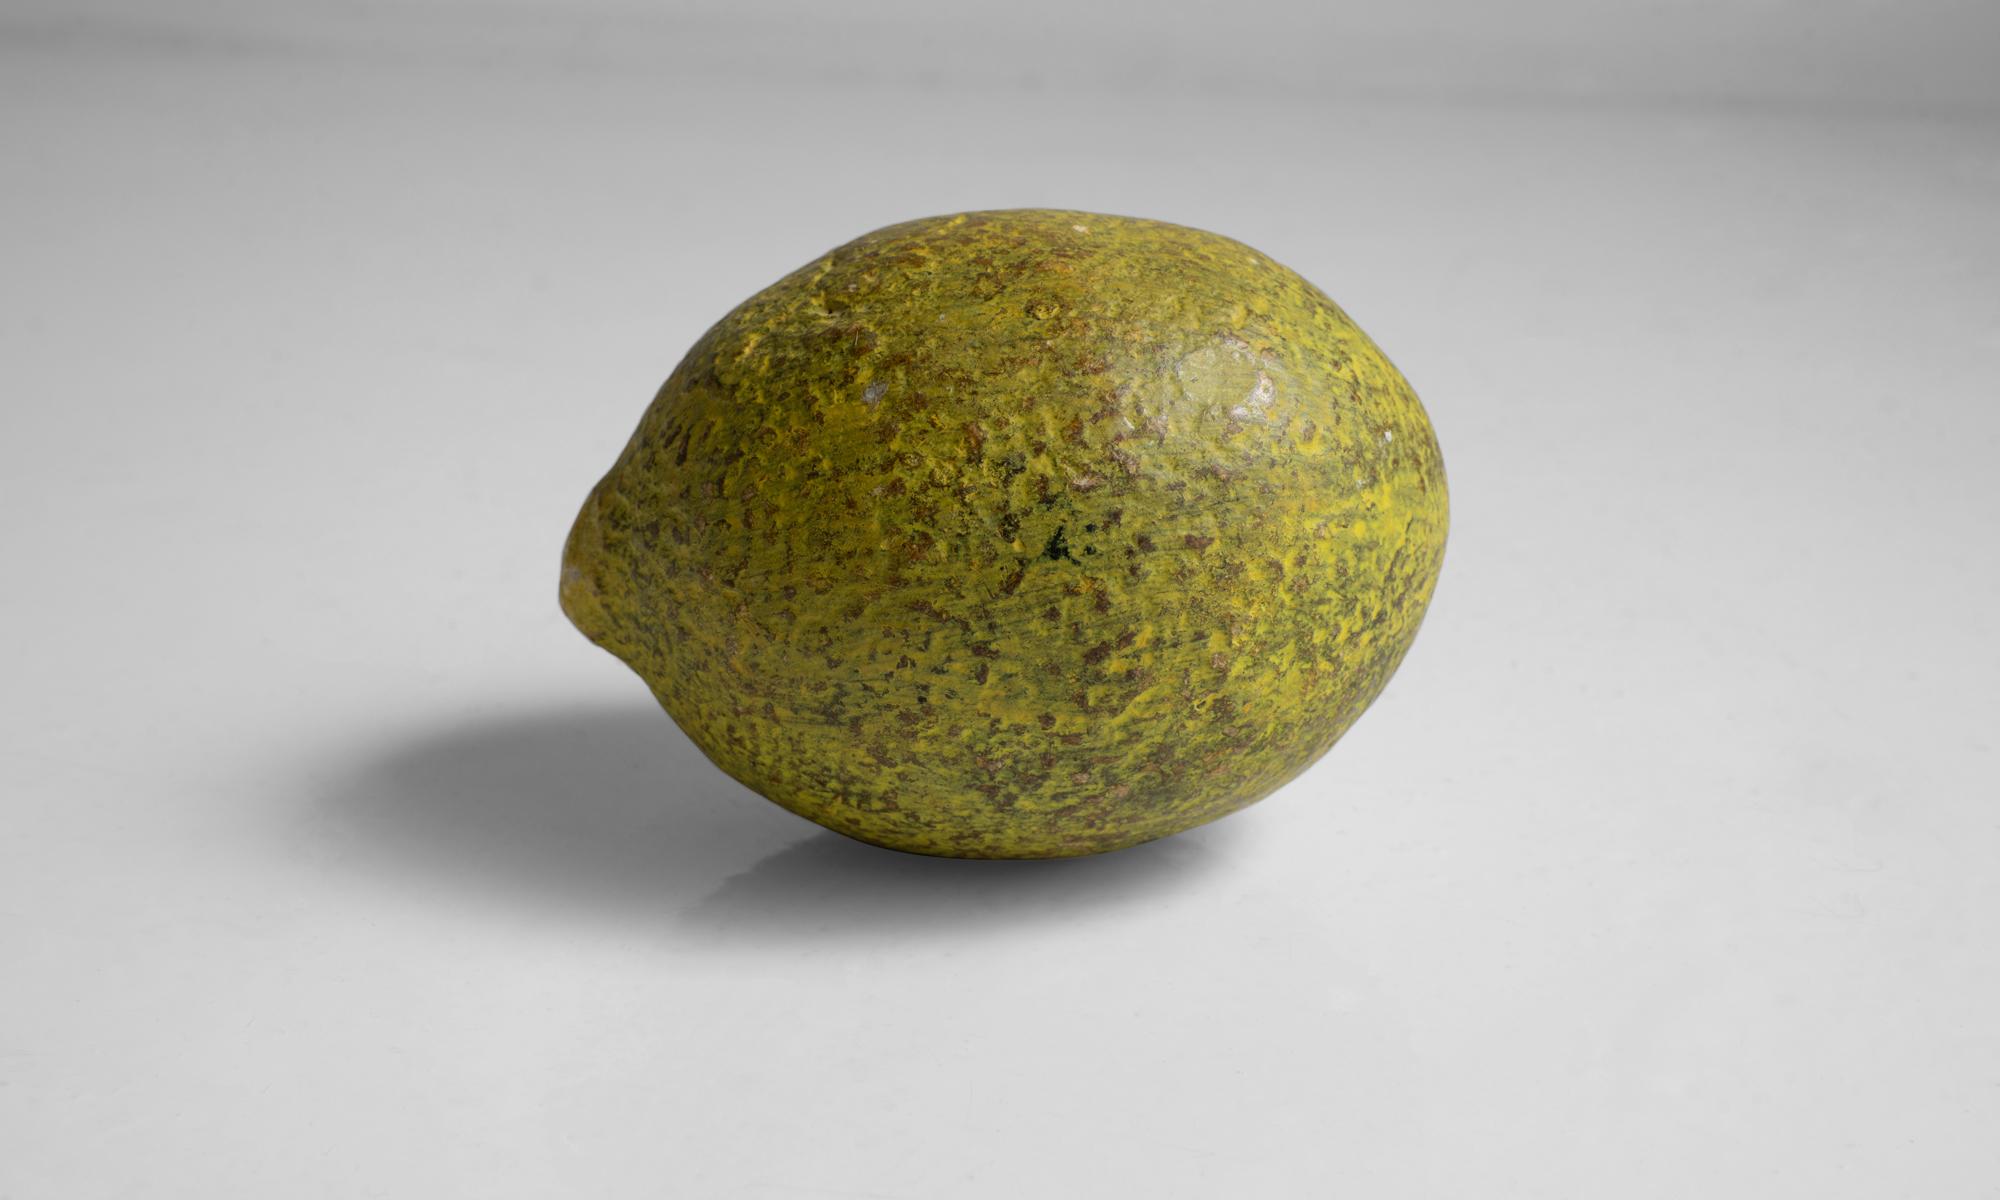 Hand Painted Stone Lemon, America 1960.

For display only, not edible. Skillfully painted.